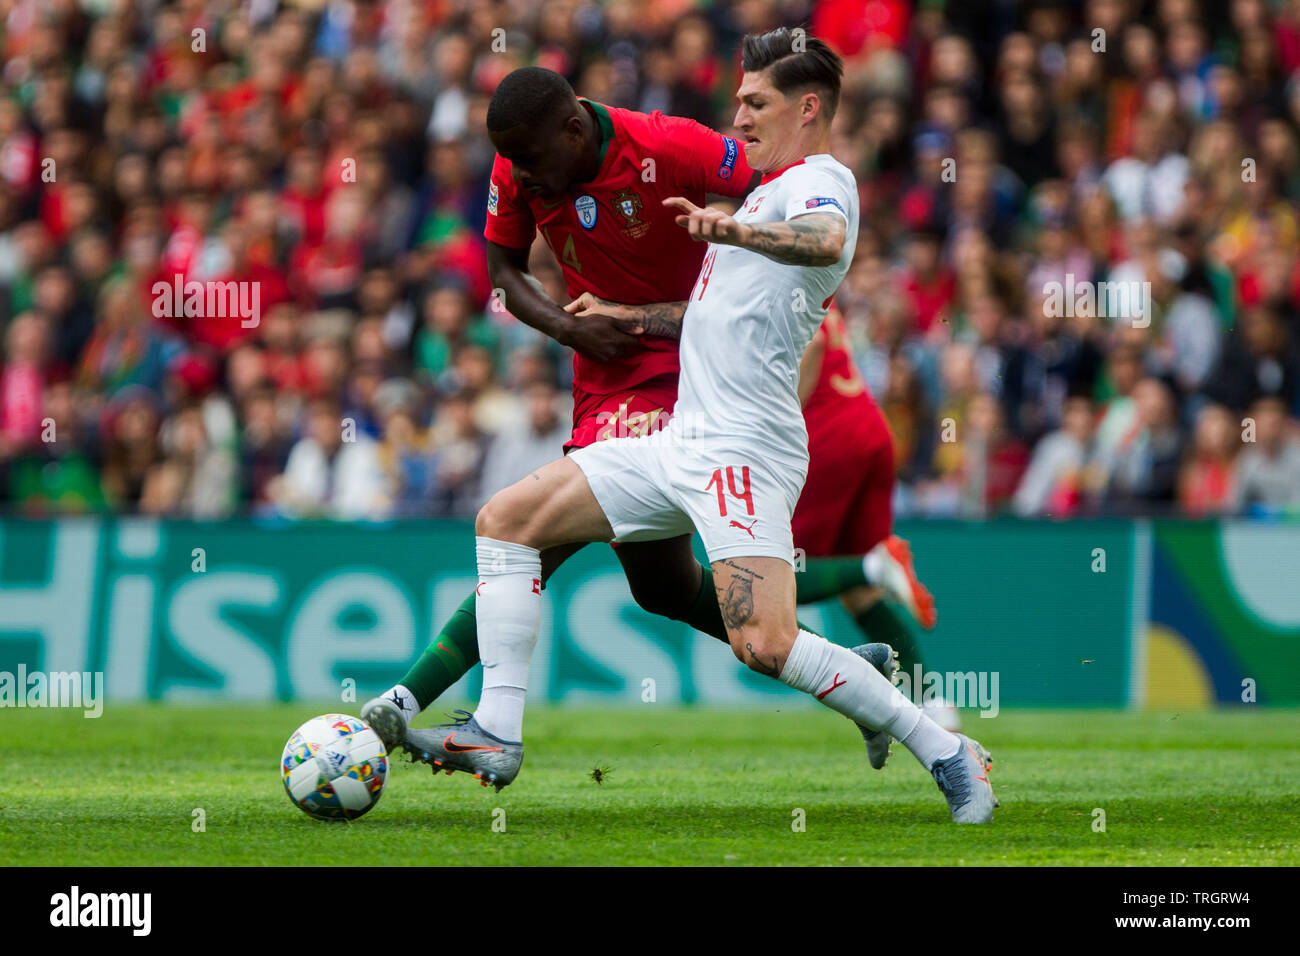 William Carvalho of POR tackles St. Zuber of SUI Stock Photo